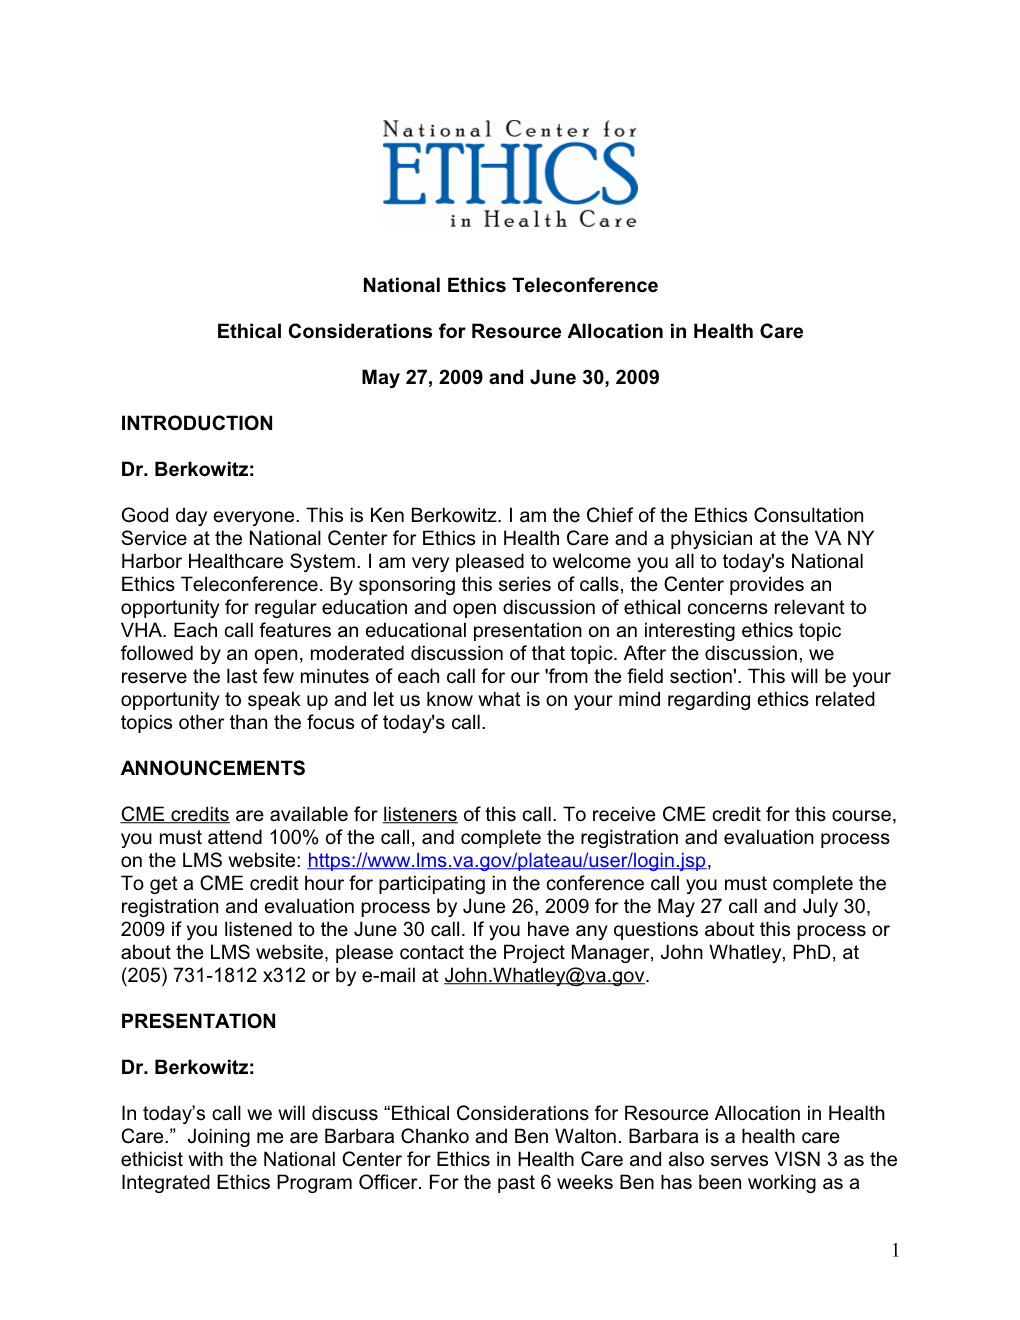 National Ethics Teleconference - Ethical Considerations for Resource Allocation in Health